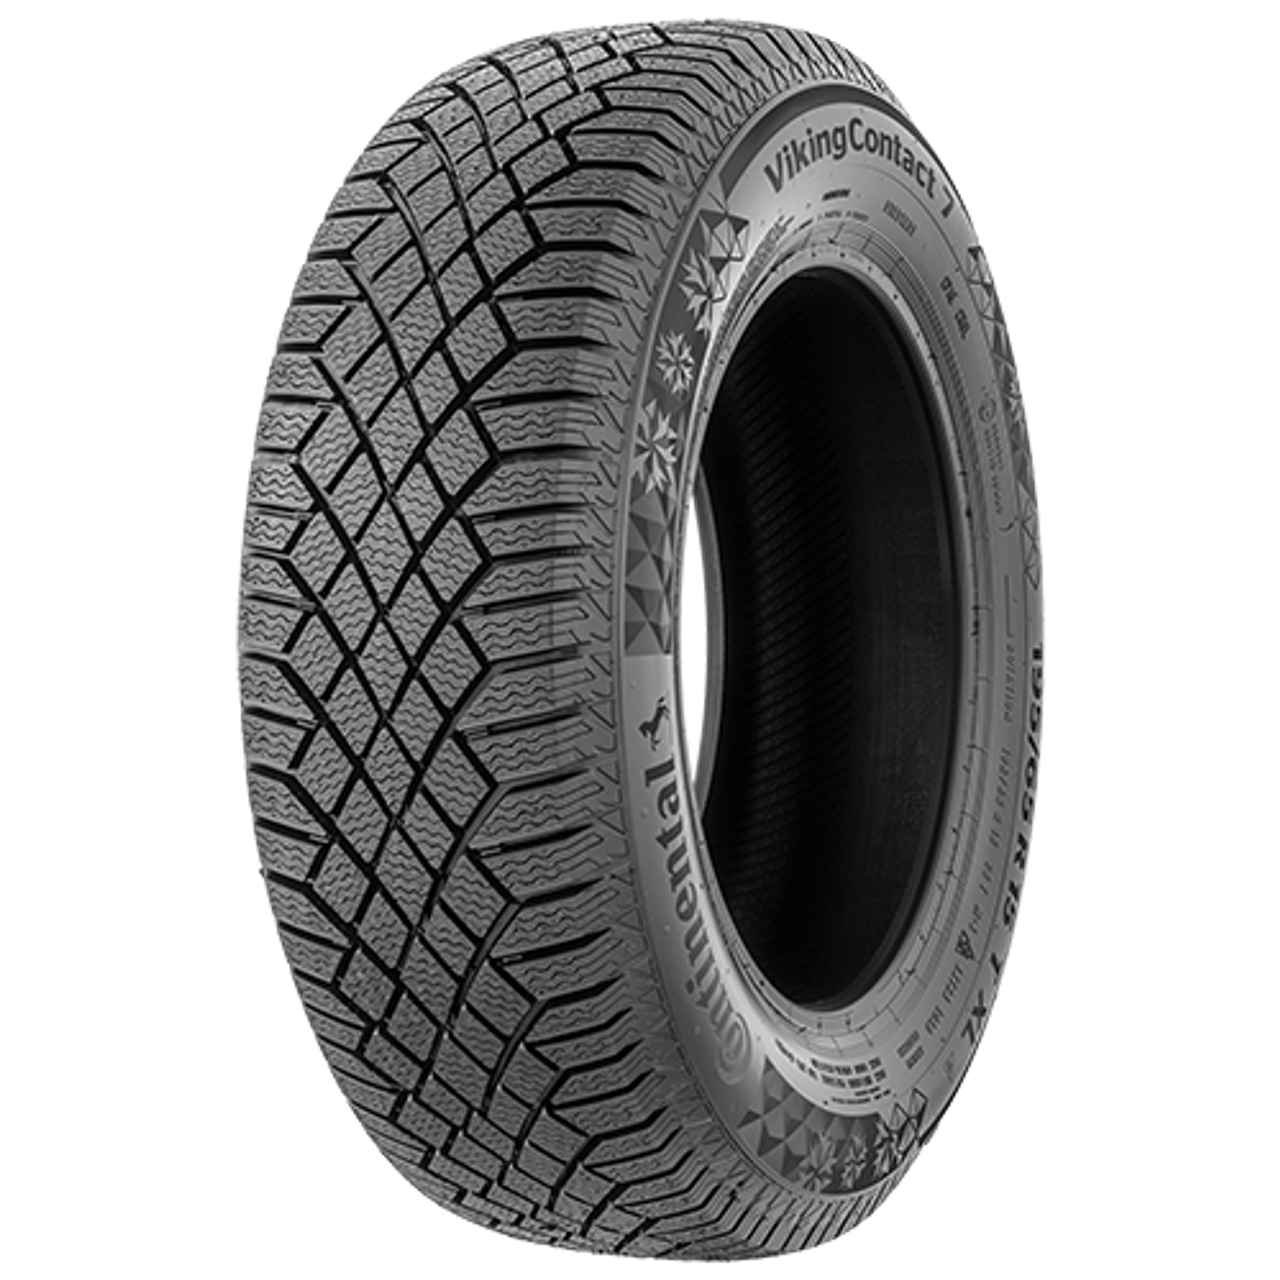 CONTINENTAL VIKINGCONTACT 7 235/45R18 98T NORDIC COMPOUND FR BSW XL